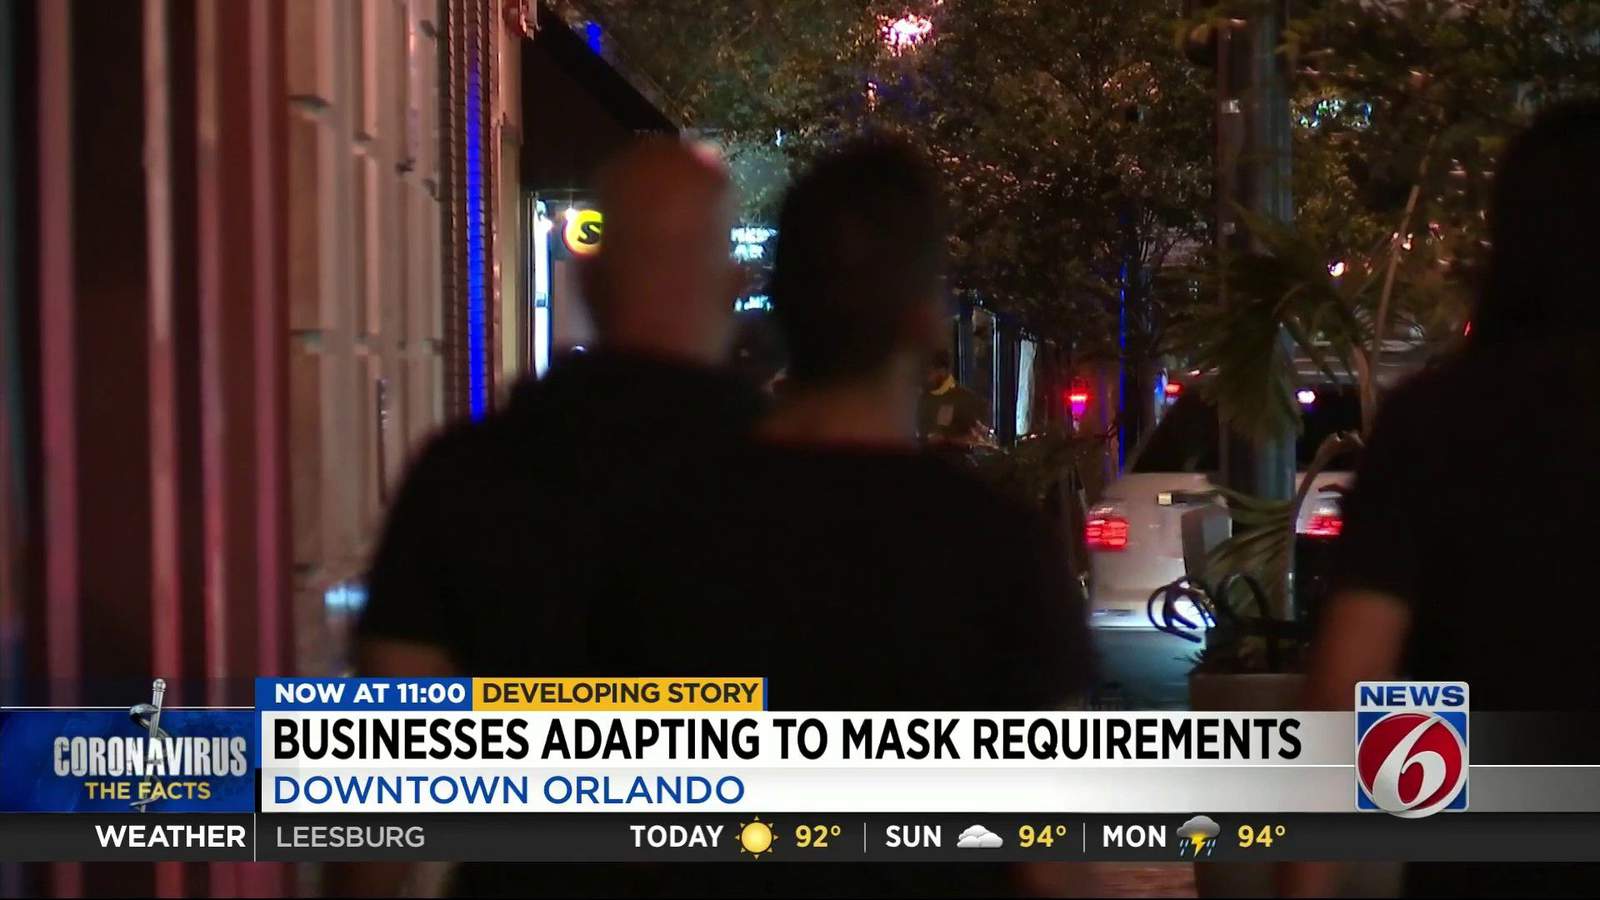 Businesses adapting to mask requirements